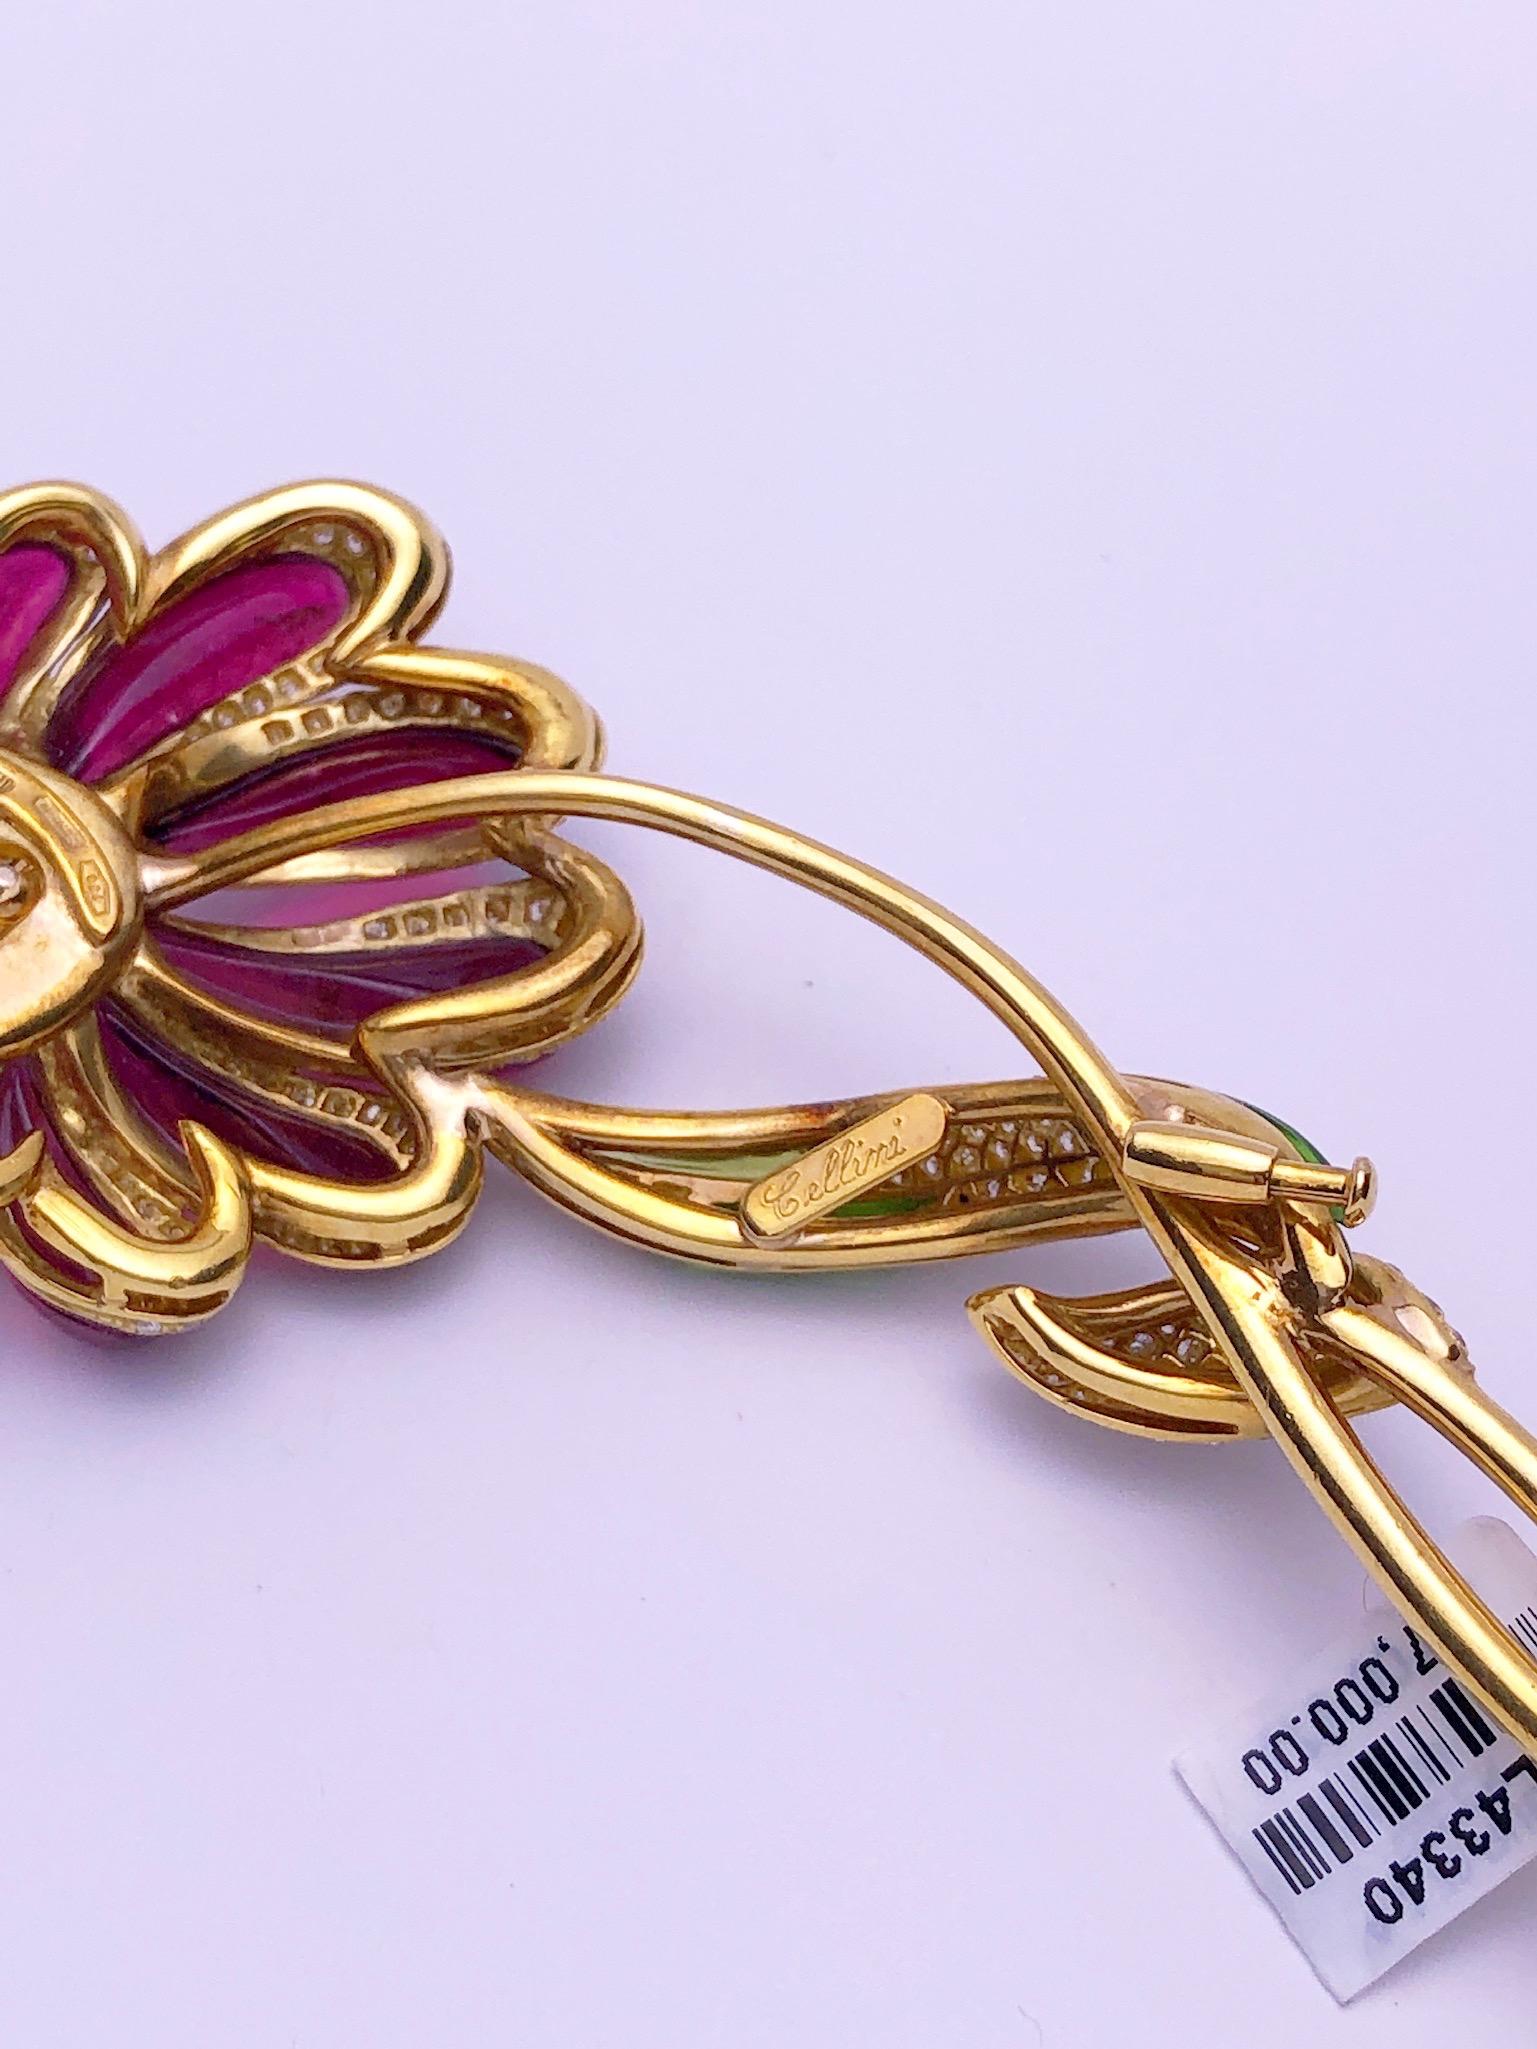 Contemporary Cellini 18 Karat Gold, Diamonds, Rubellite and Green Tourmaline Flower Brooch For Sale